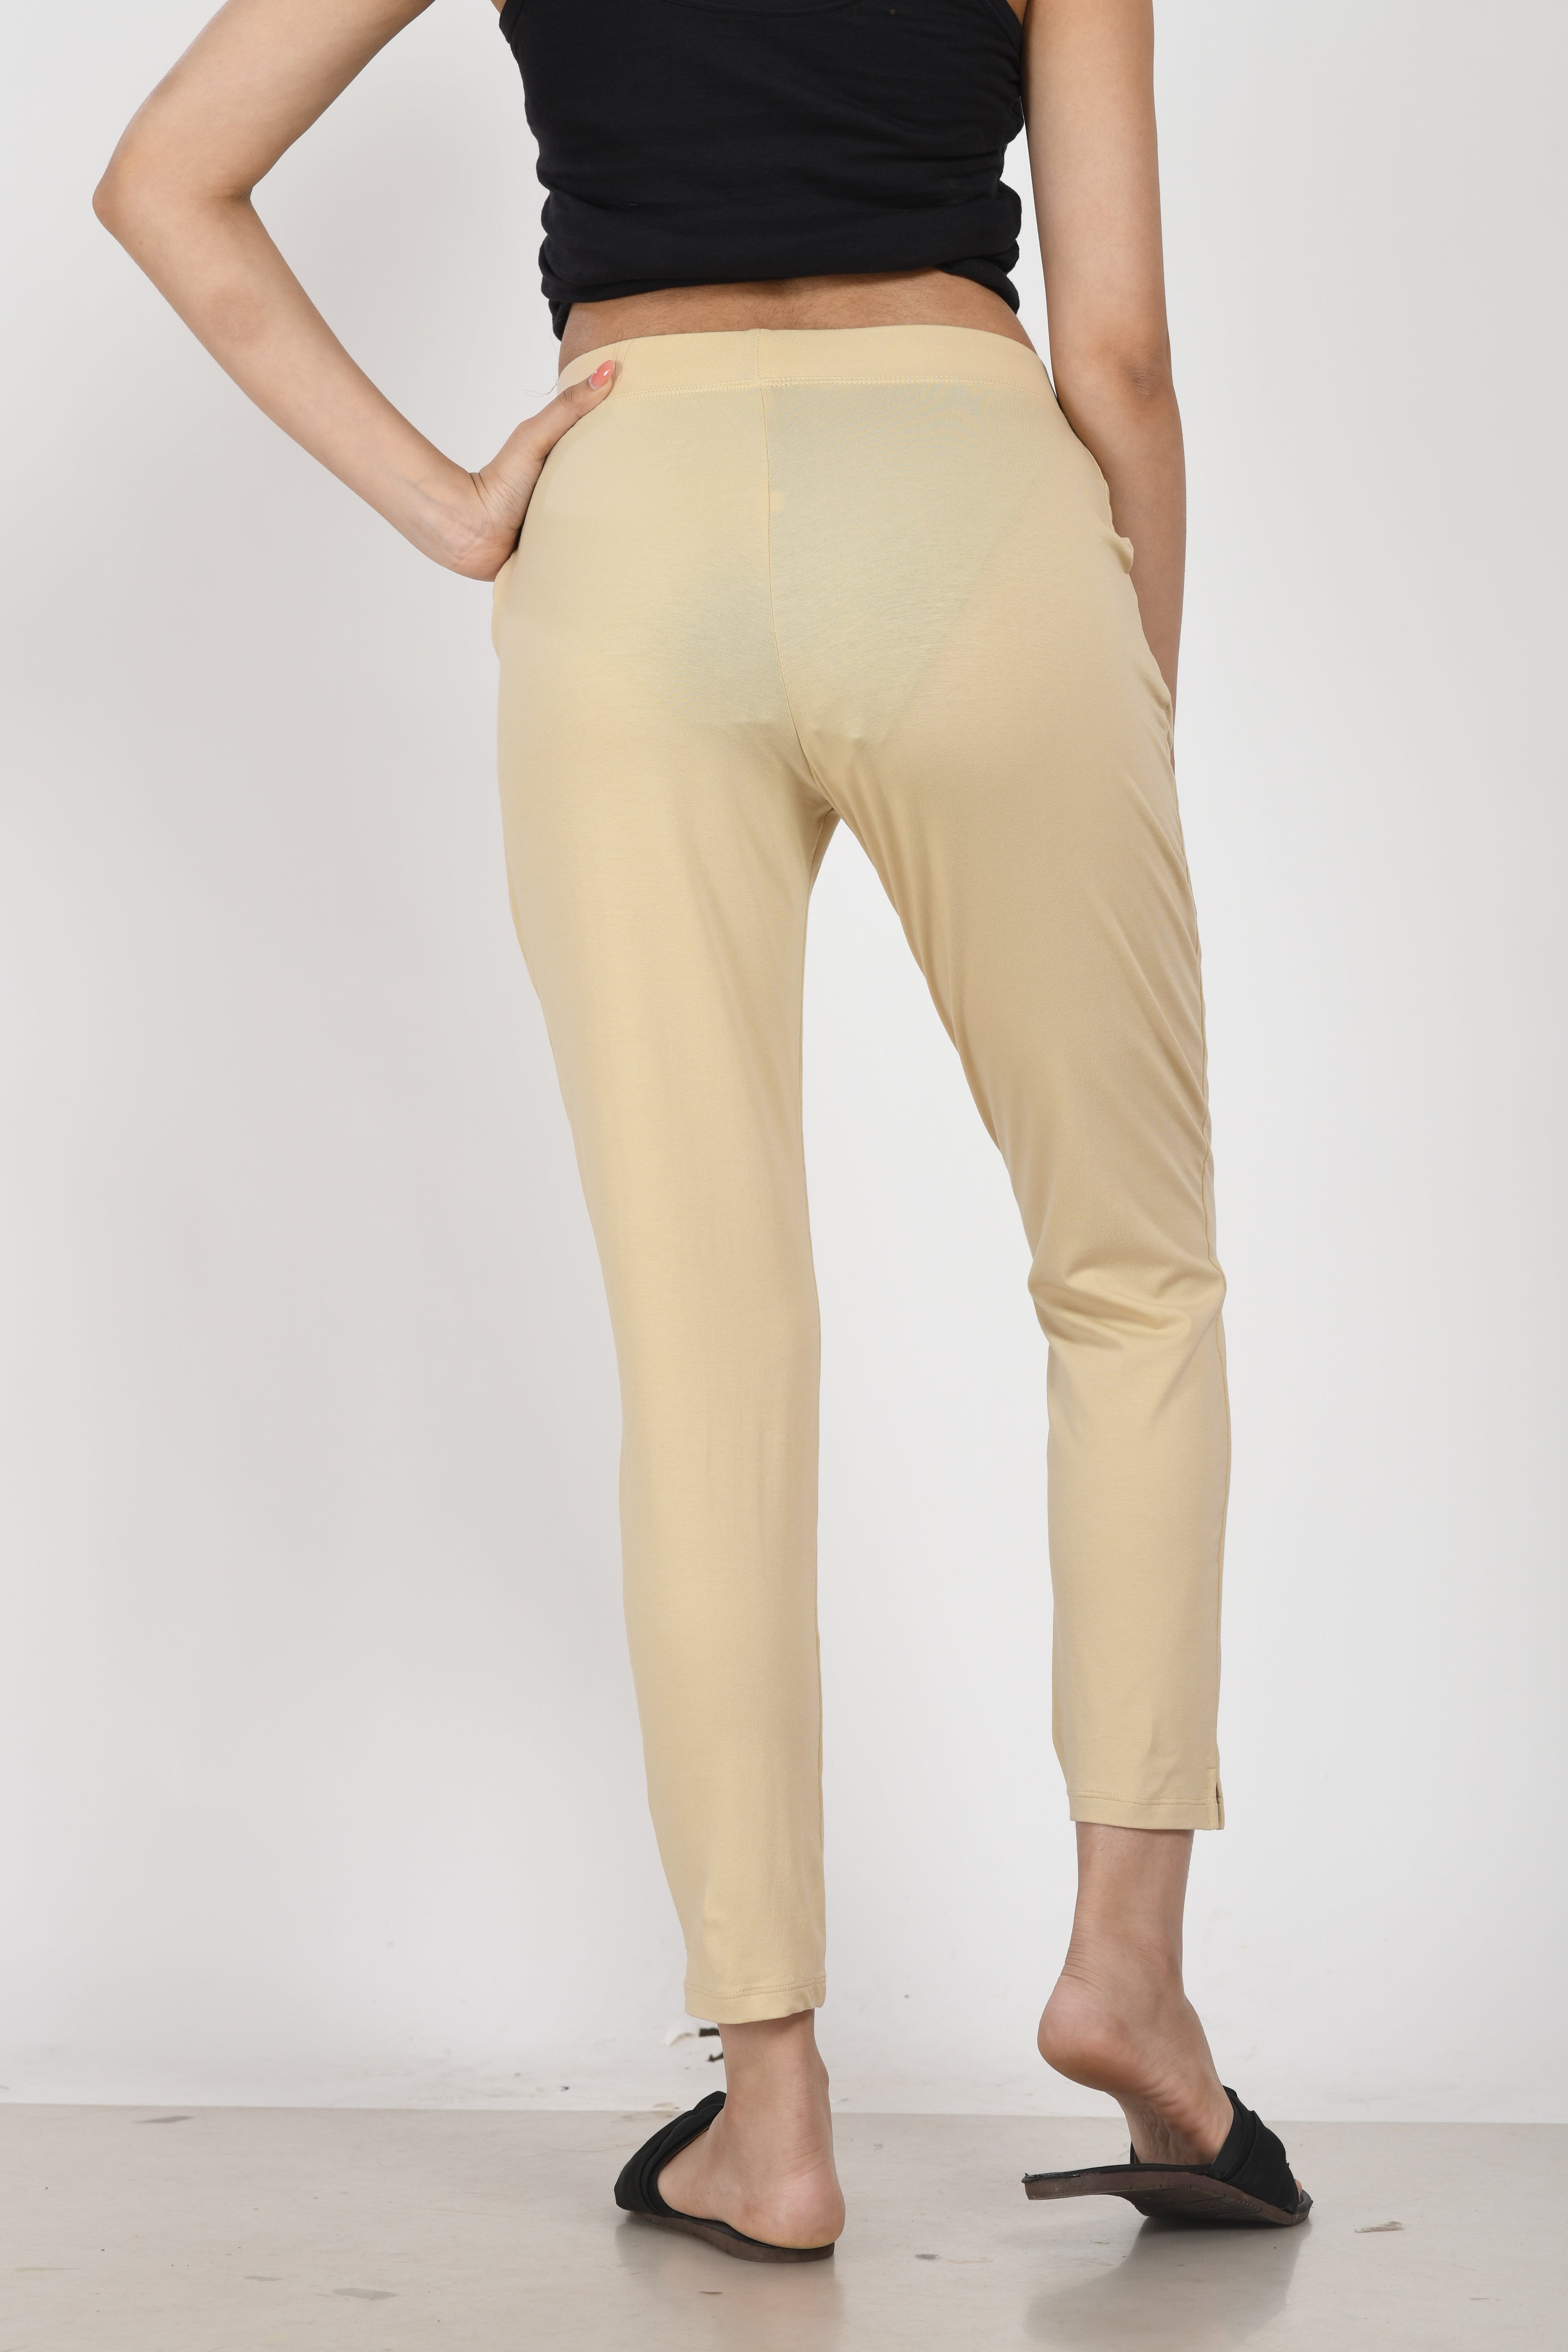 Buy Online Beige Rayon Pants for Women & Girls at Best Prices in Biba  India-FLORALH15377AW19BEG